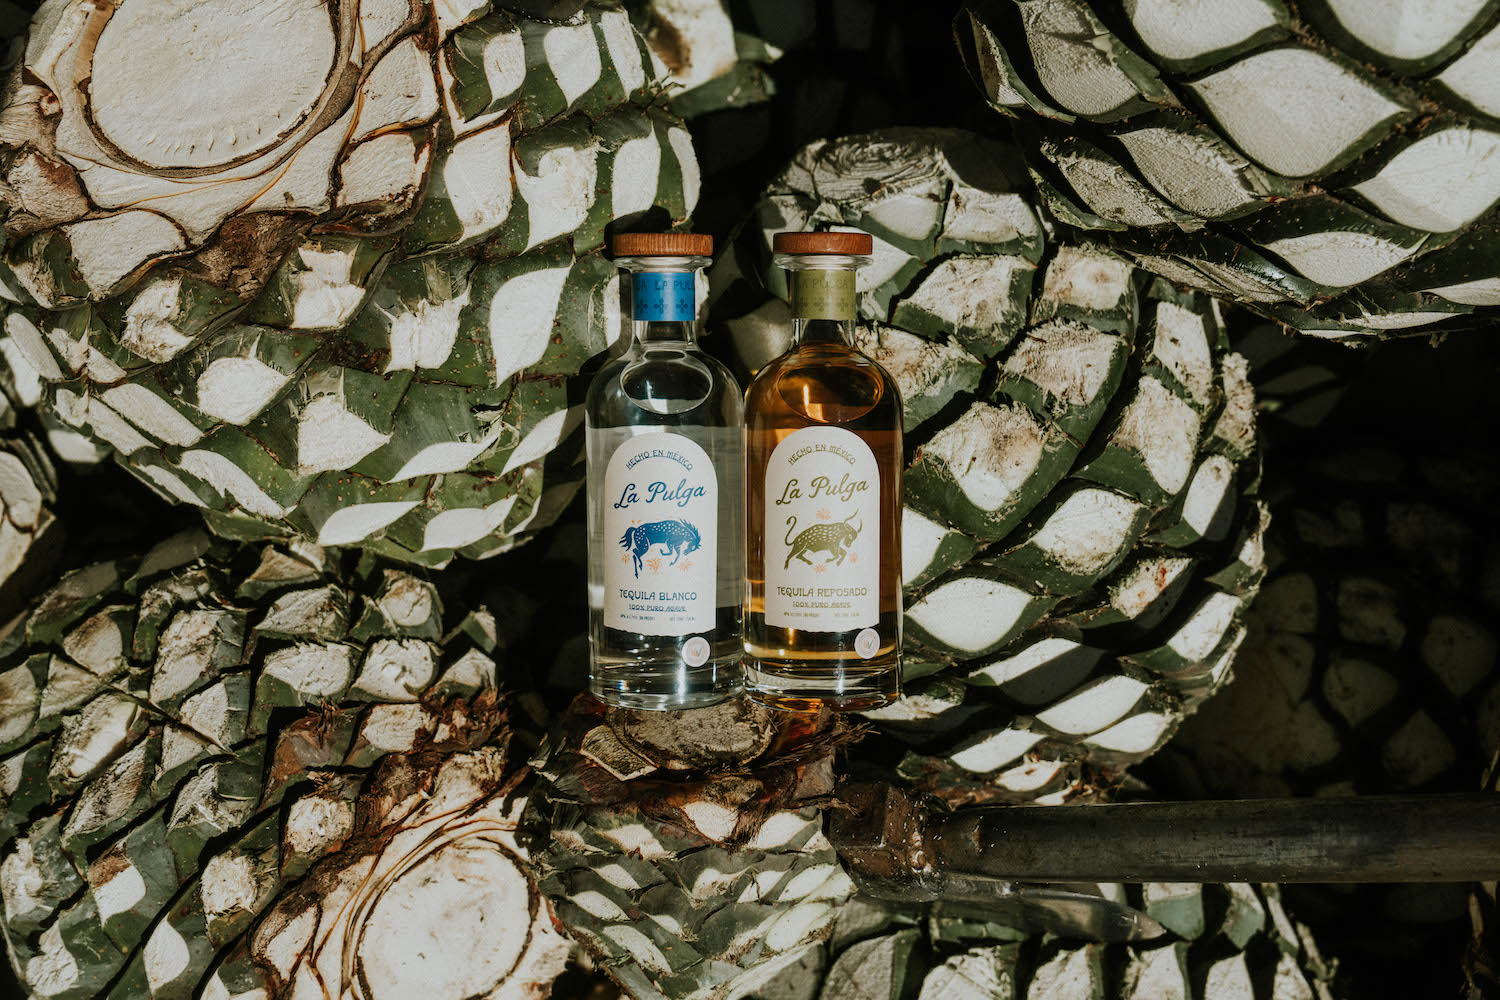 bottles of tequila posed against plant.